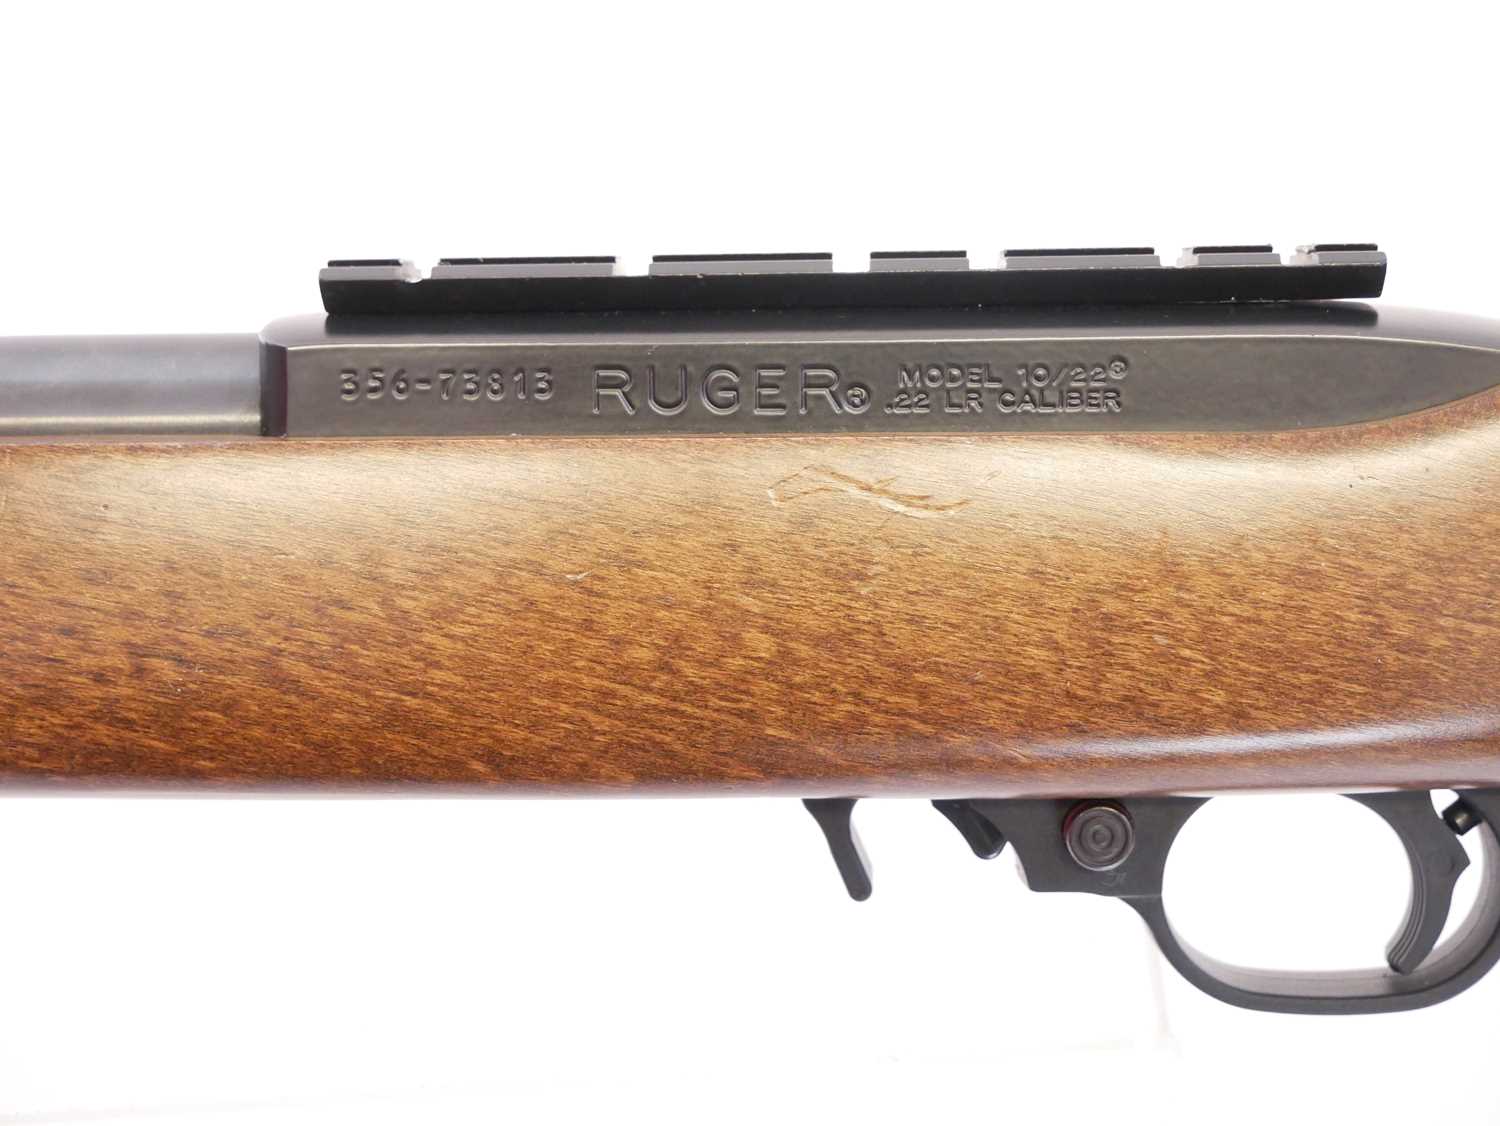 Ruger 10-22 .22lr semi auto rifle and moderator, serial number 356-73813, 16.5inch barrel fitted - Image 9 of 11